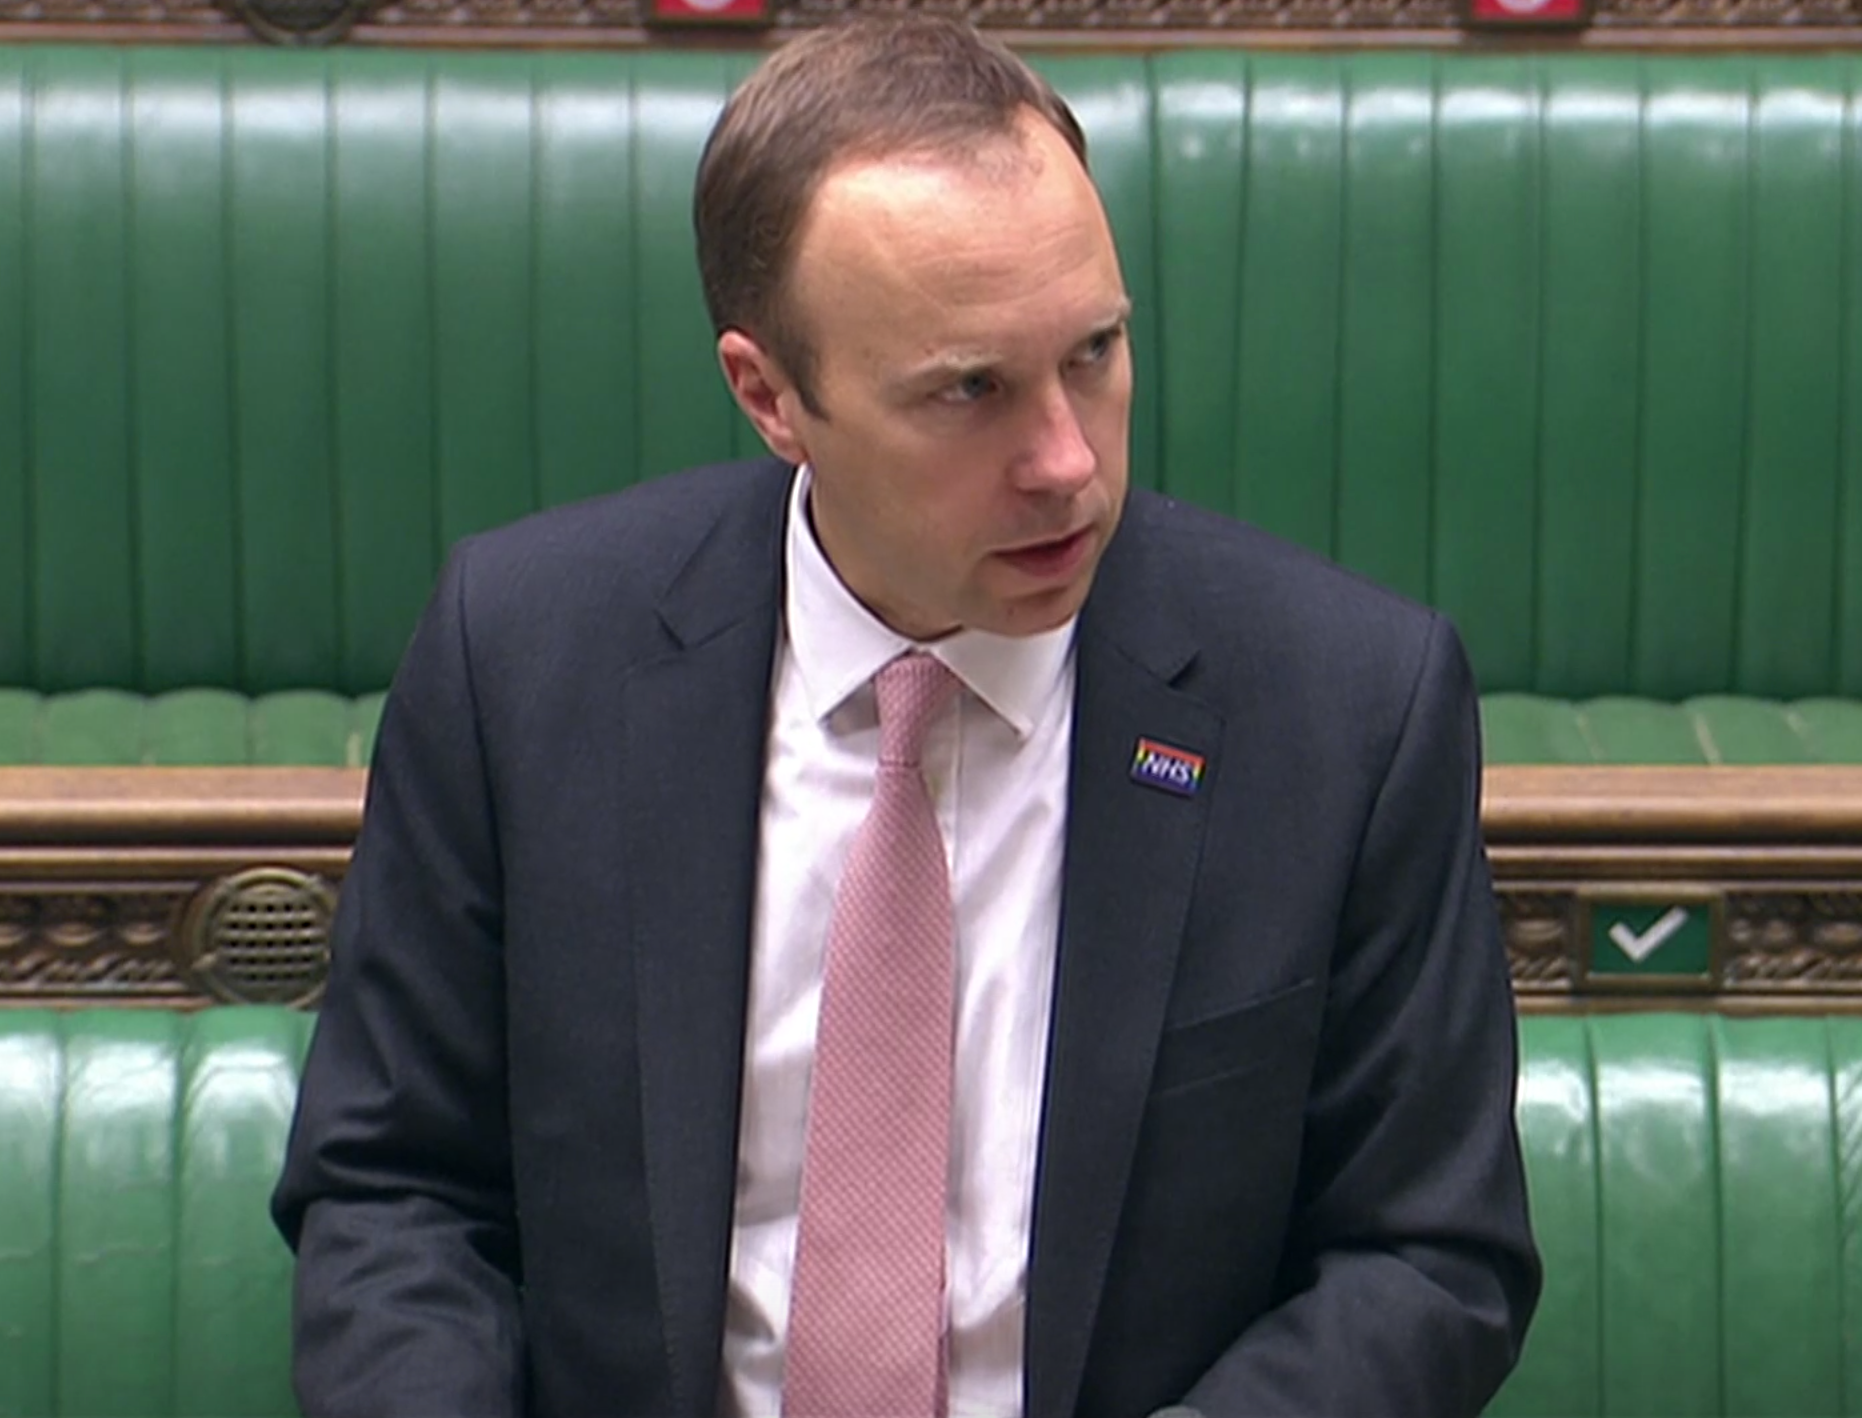 Matt Hancock answers questions on the coronavirus crisis in the House of Commons